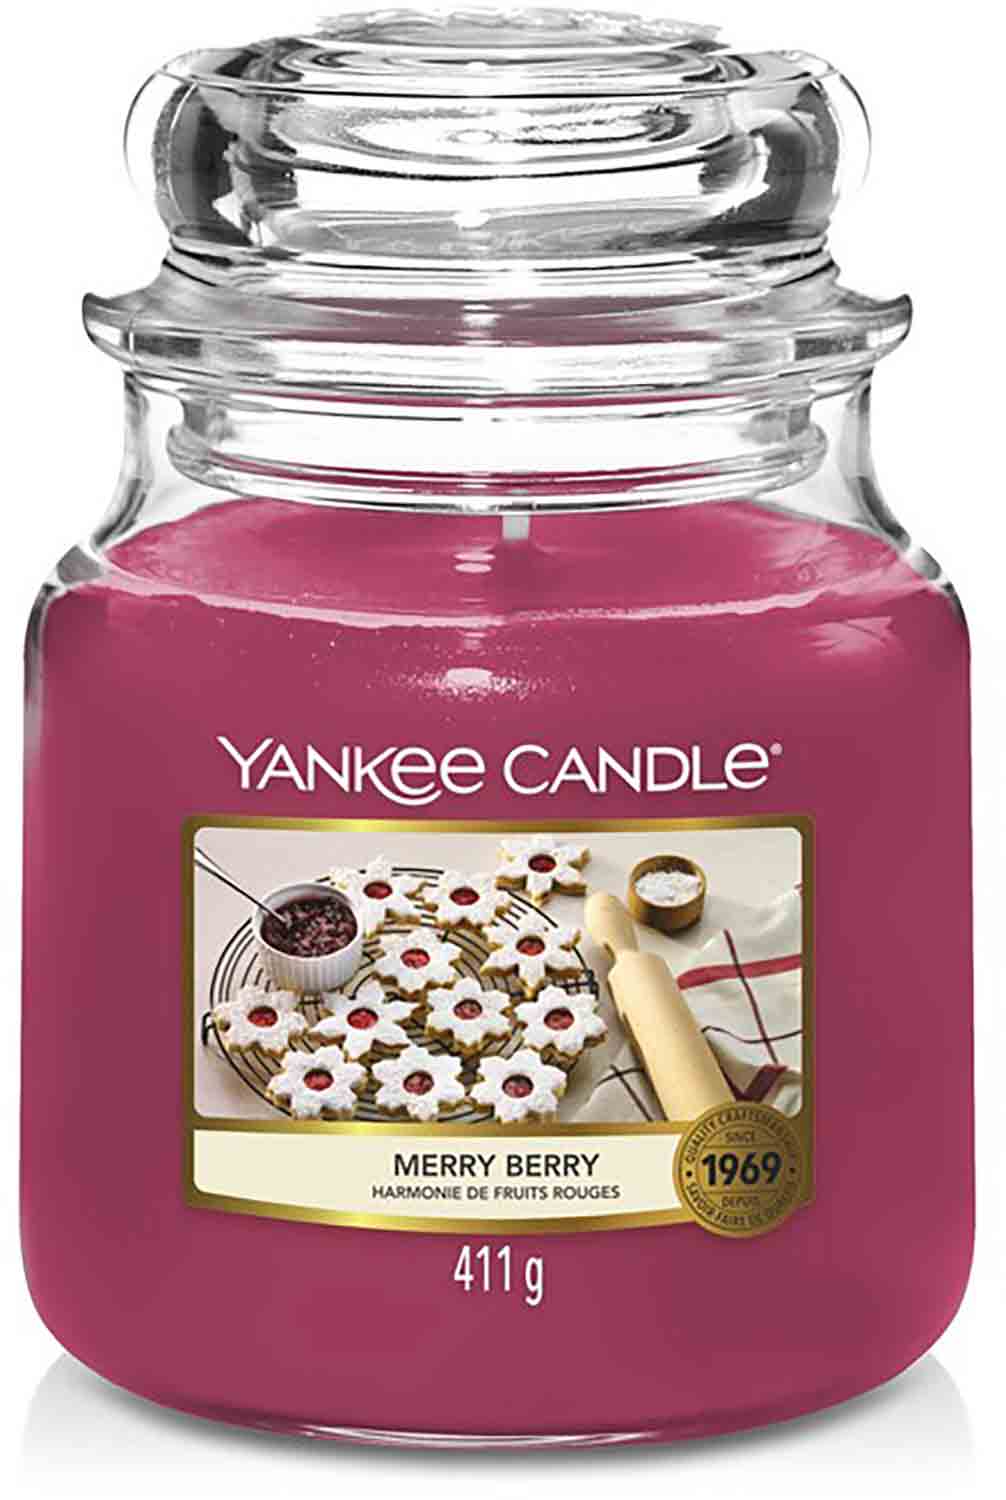 Yankee Candle Merry Berry 411g Assorted